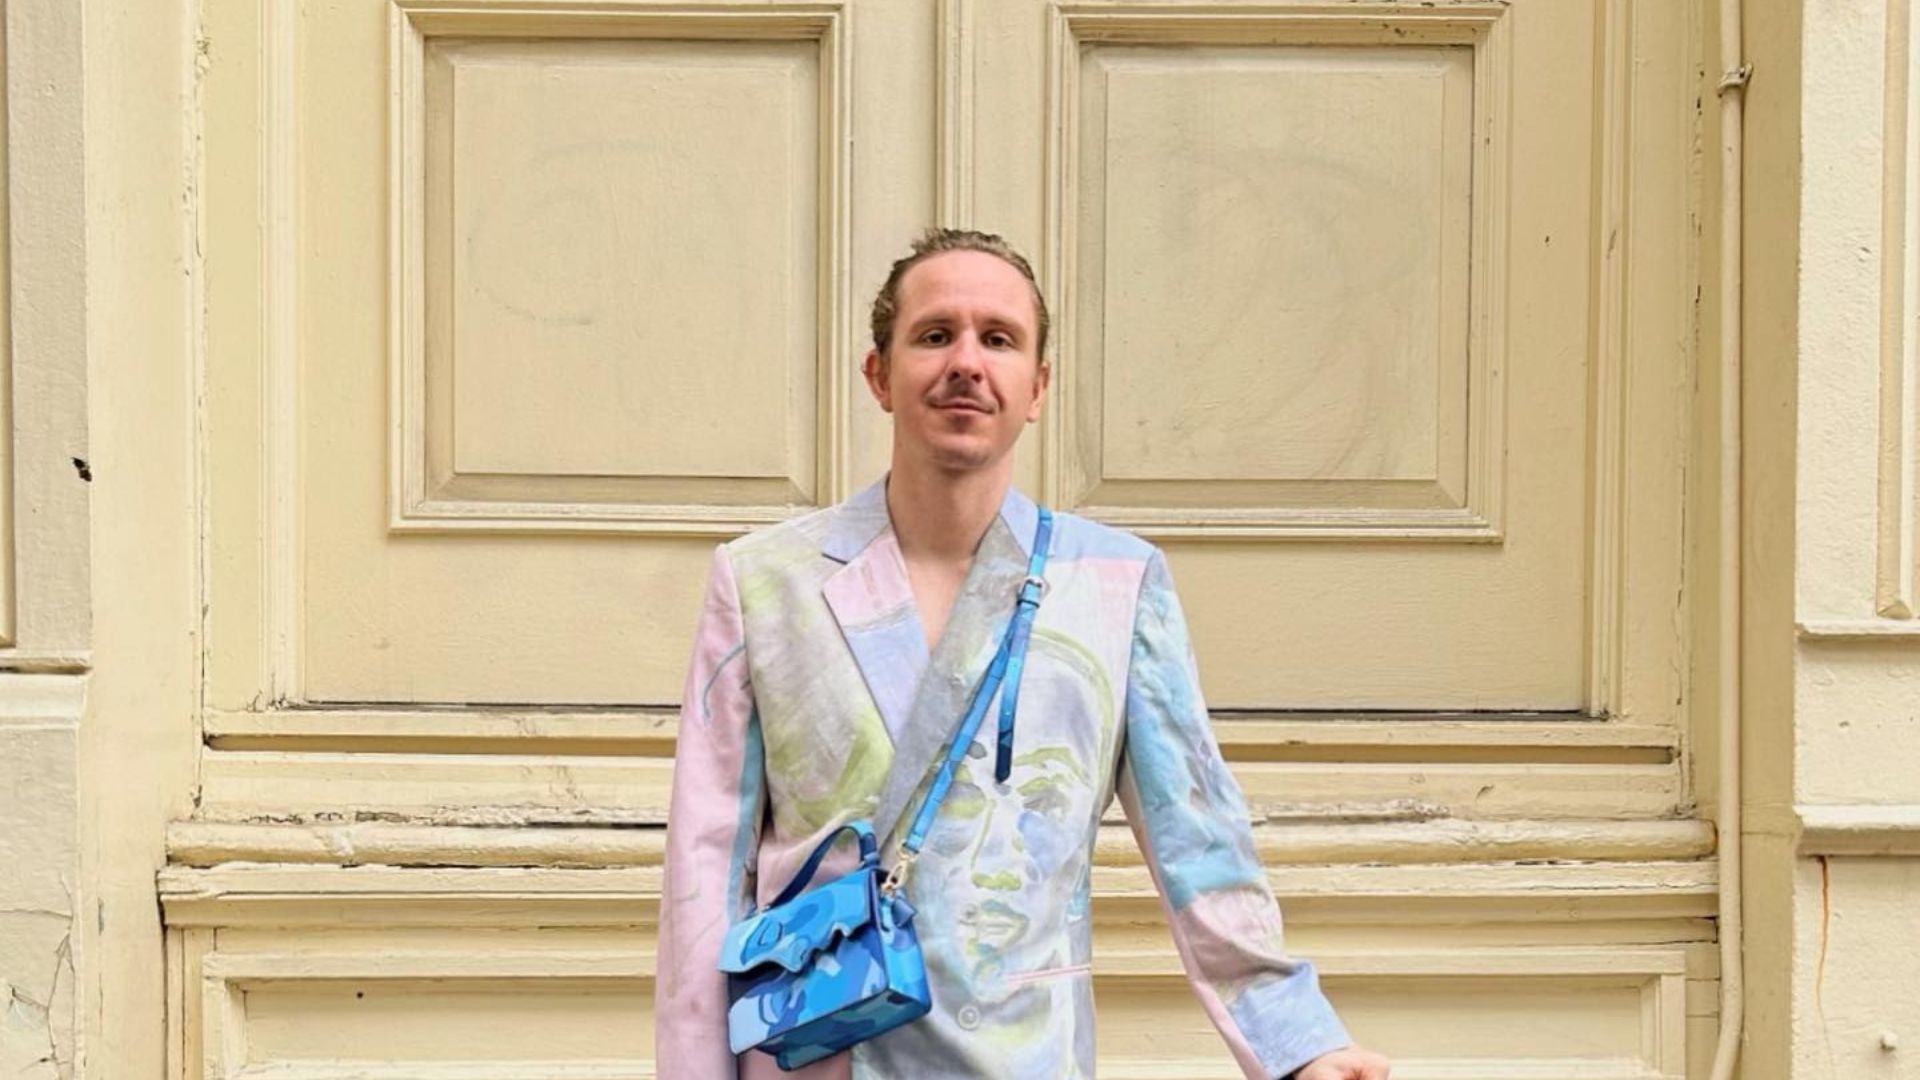 Louis Vuitton Collabs With Colm Dillane Of Kidsuper For Fall